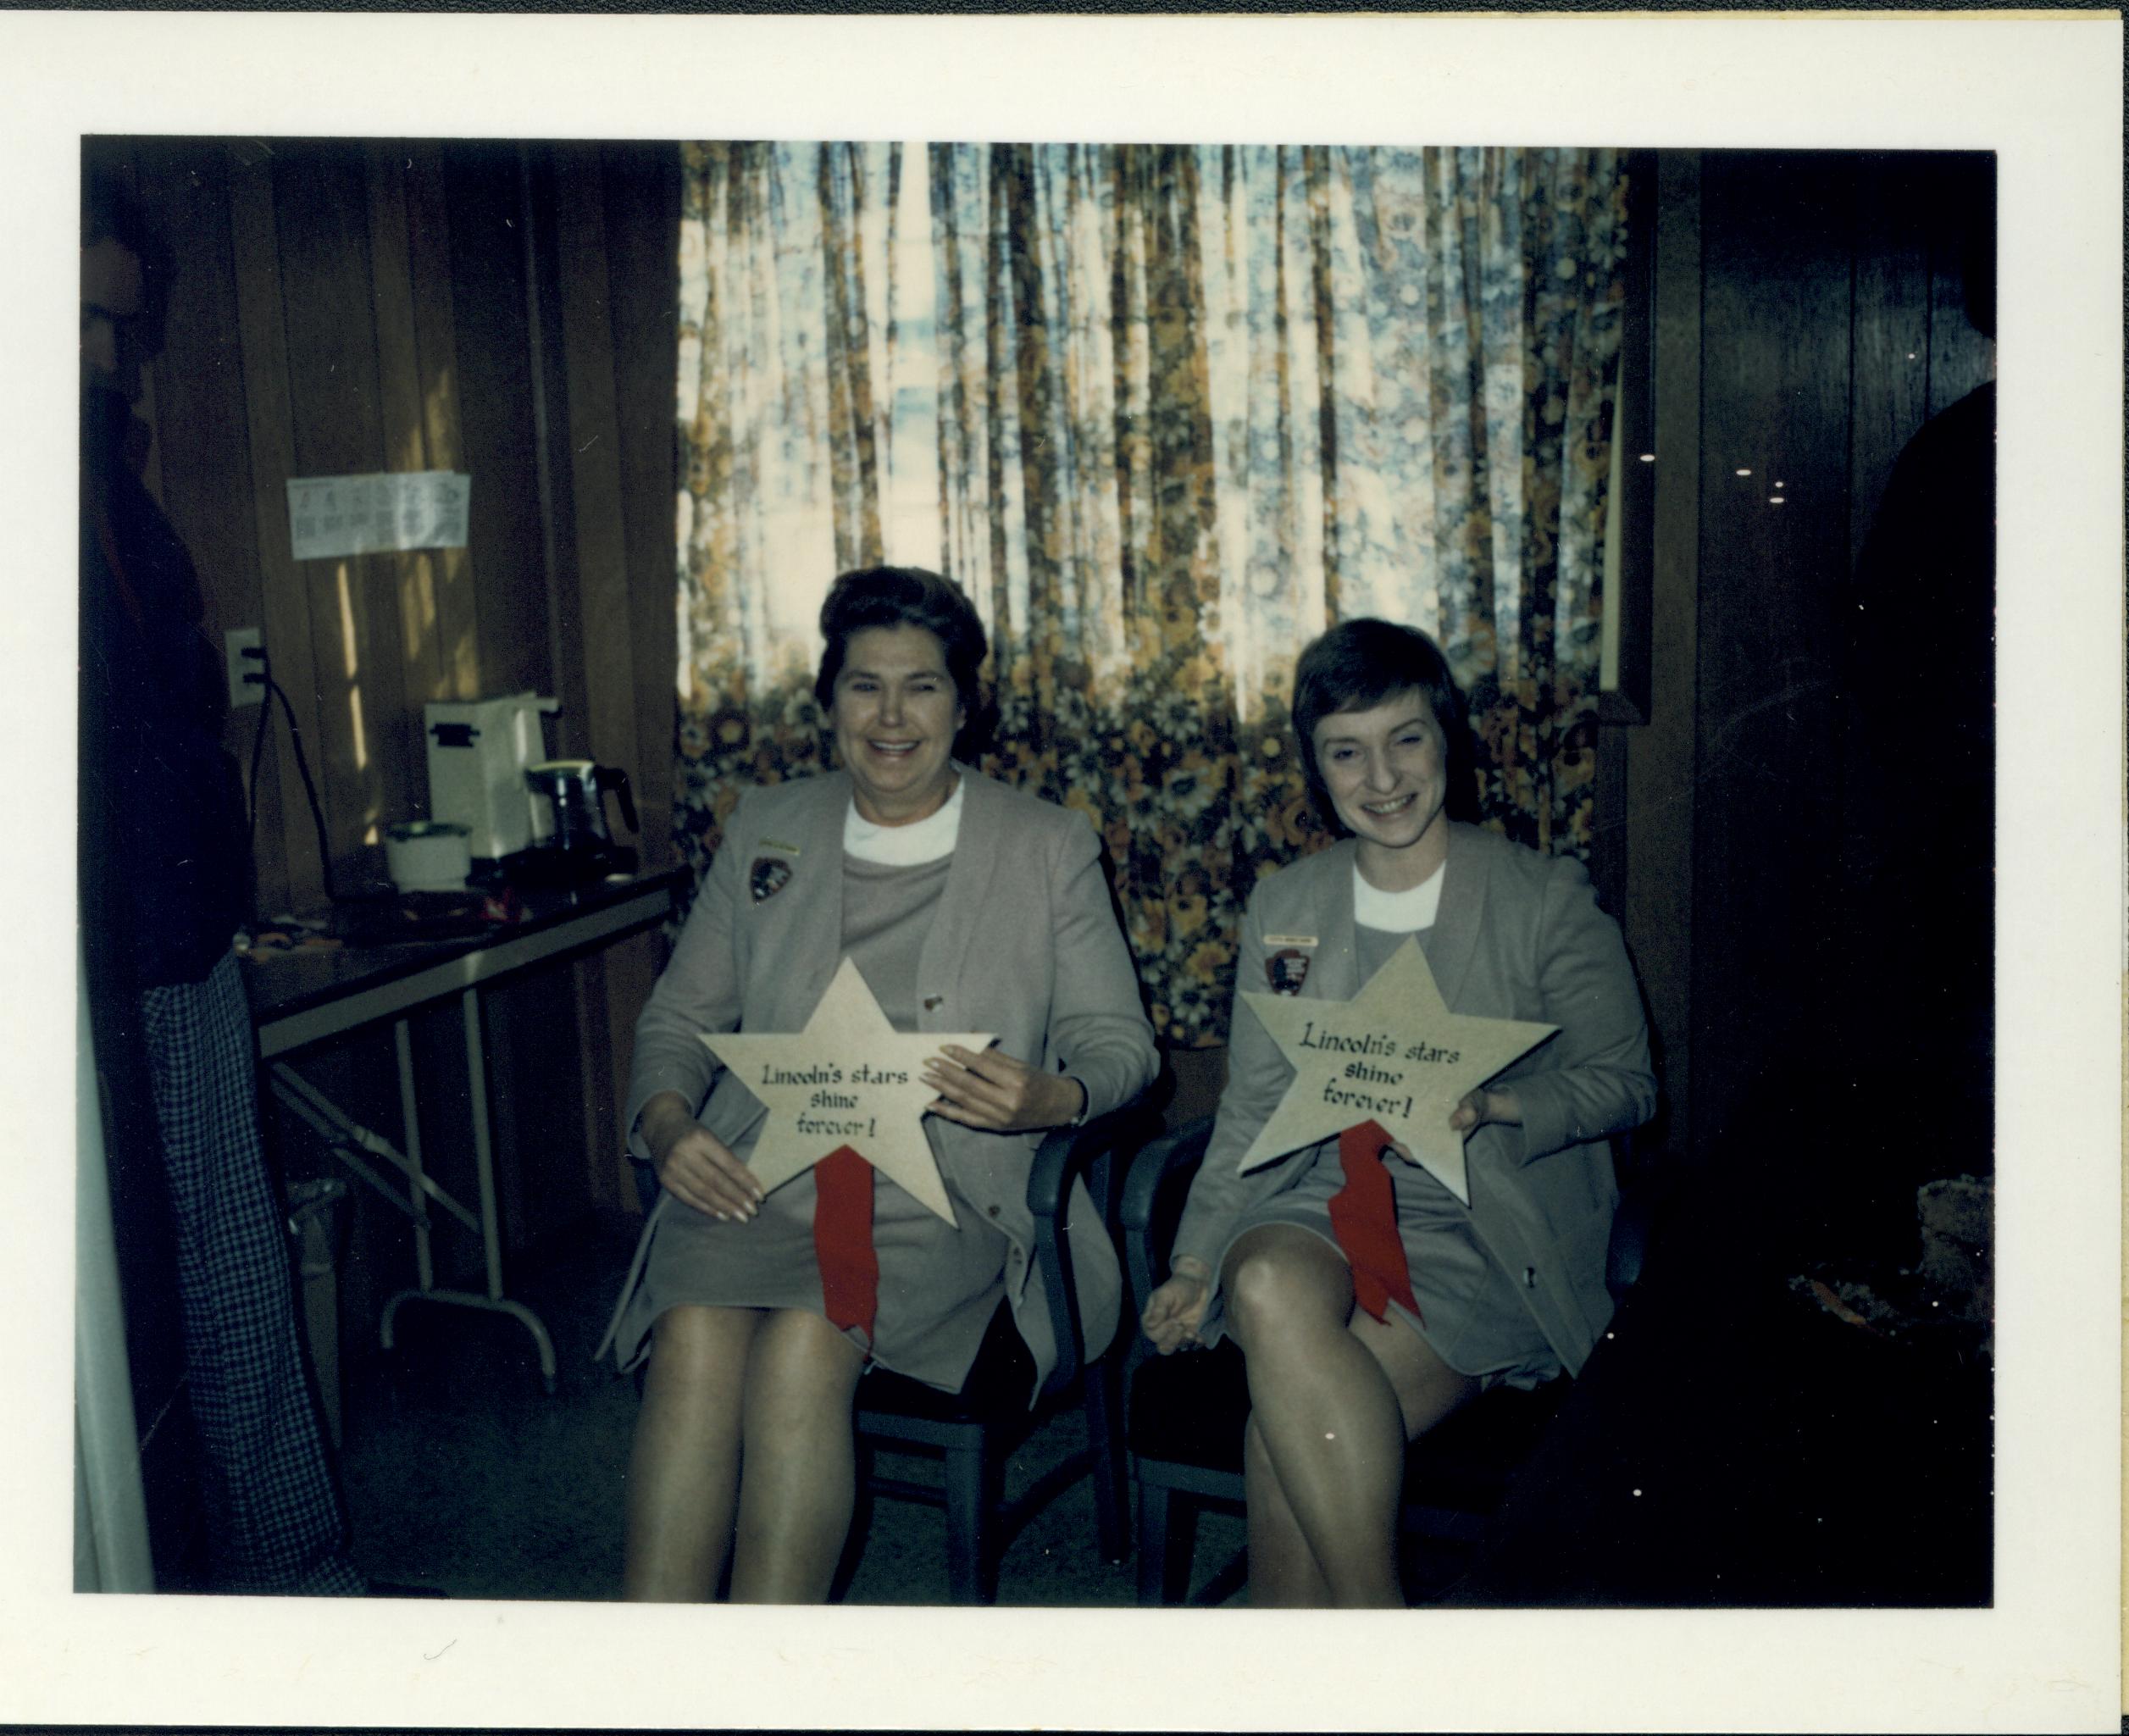 Ruth Ketchum and Judy Winkelmann with star awards for being on a television show. Stuve House(?) awards, staff, Stuve